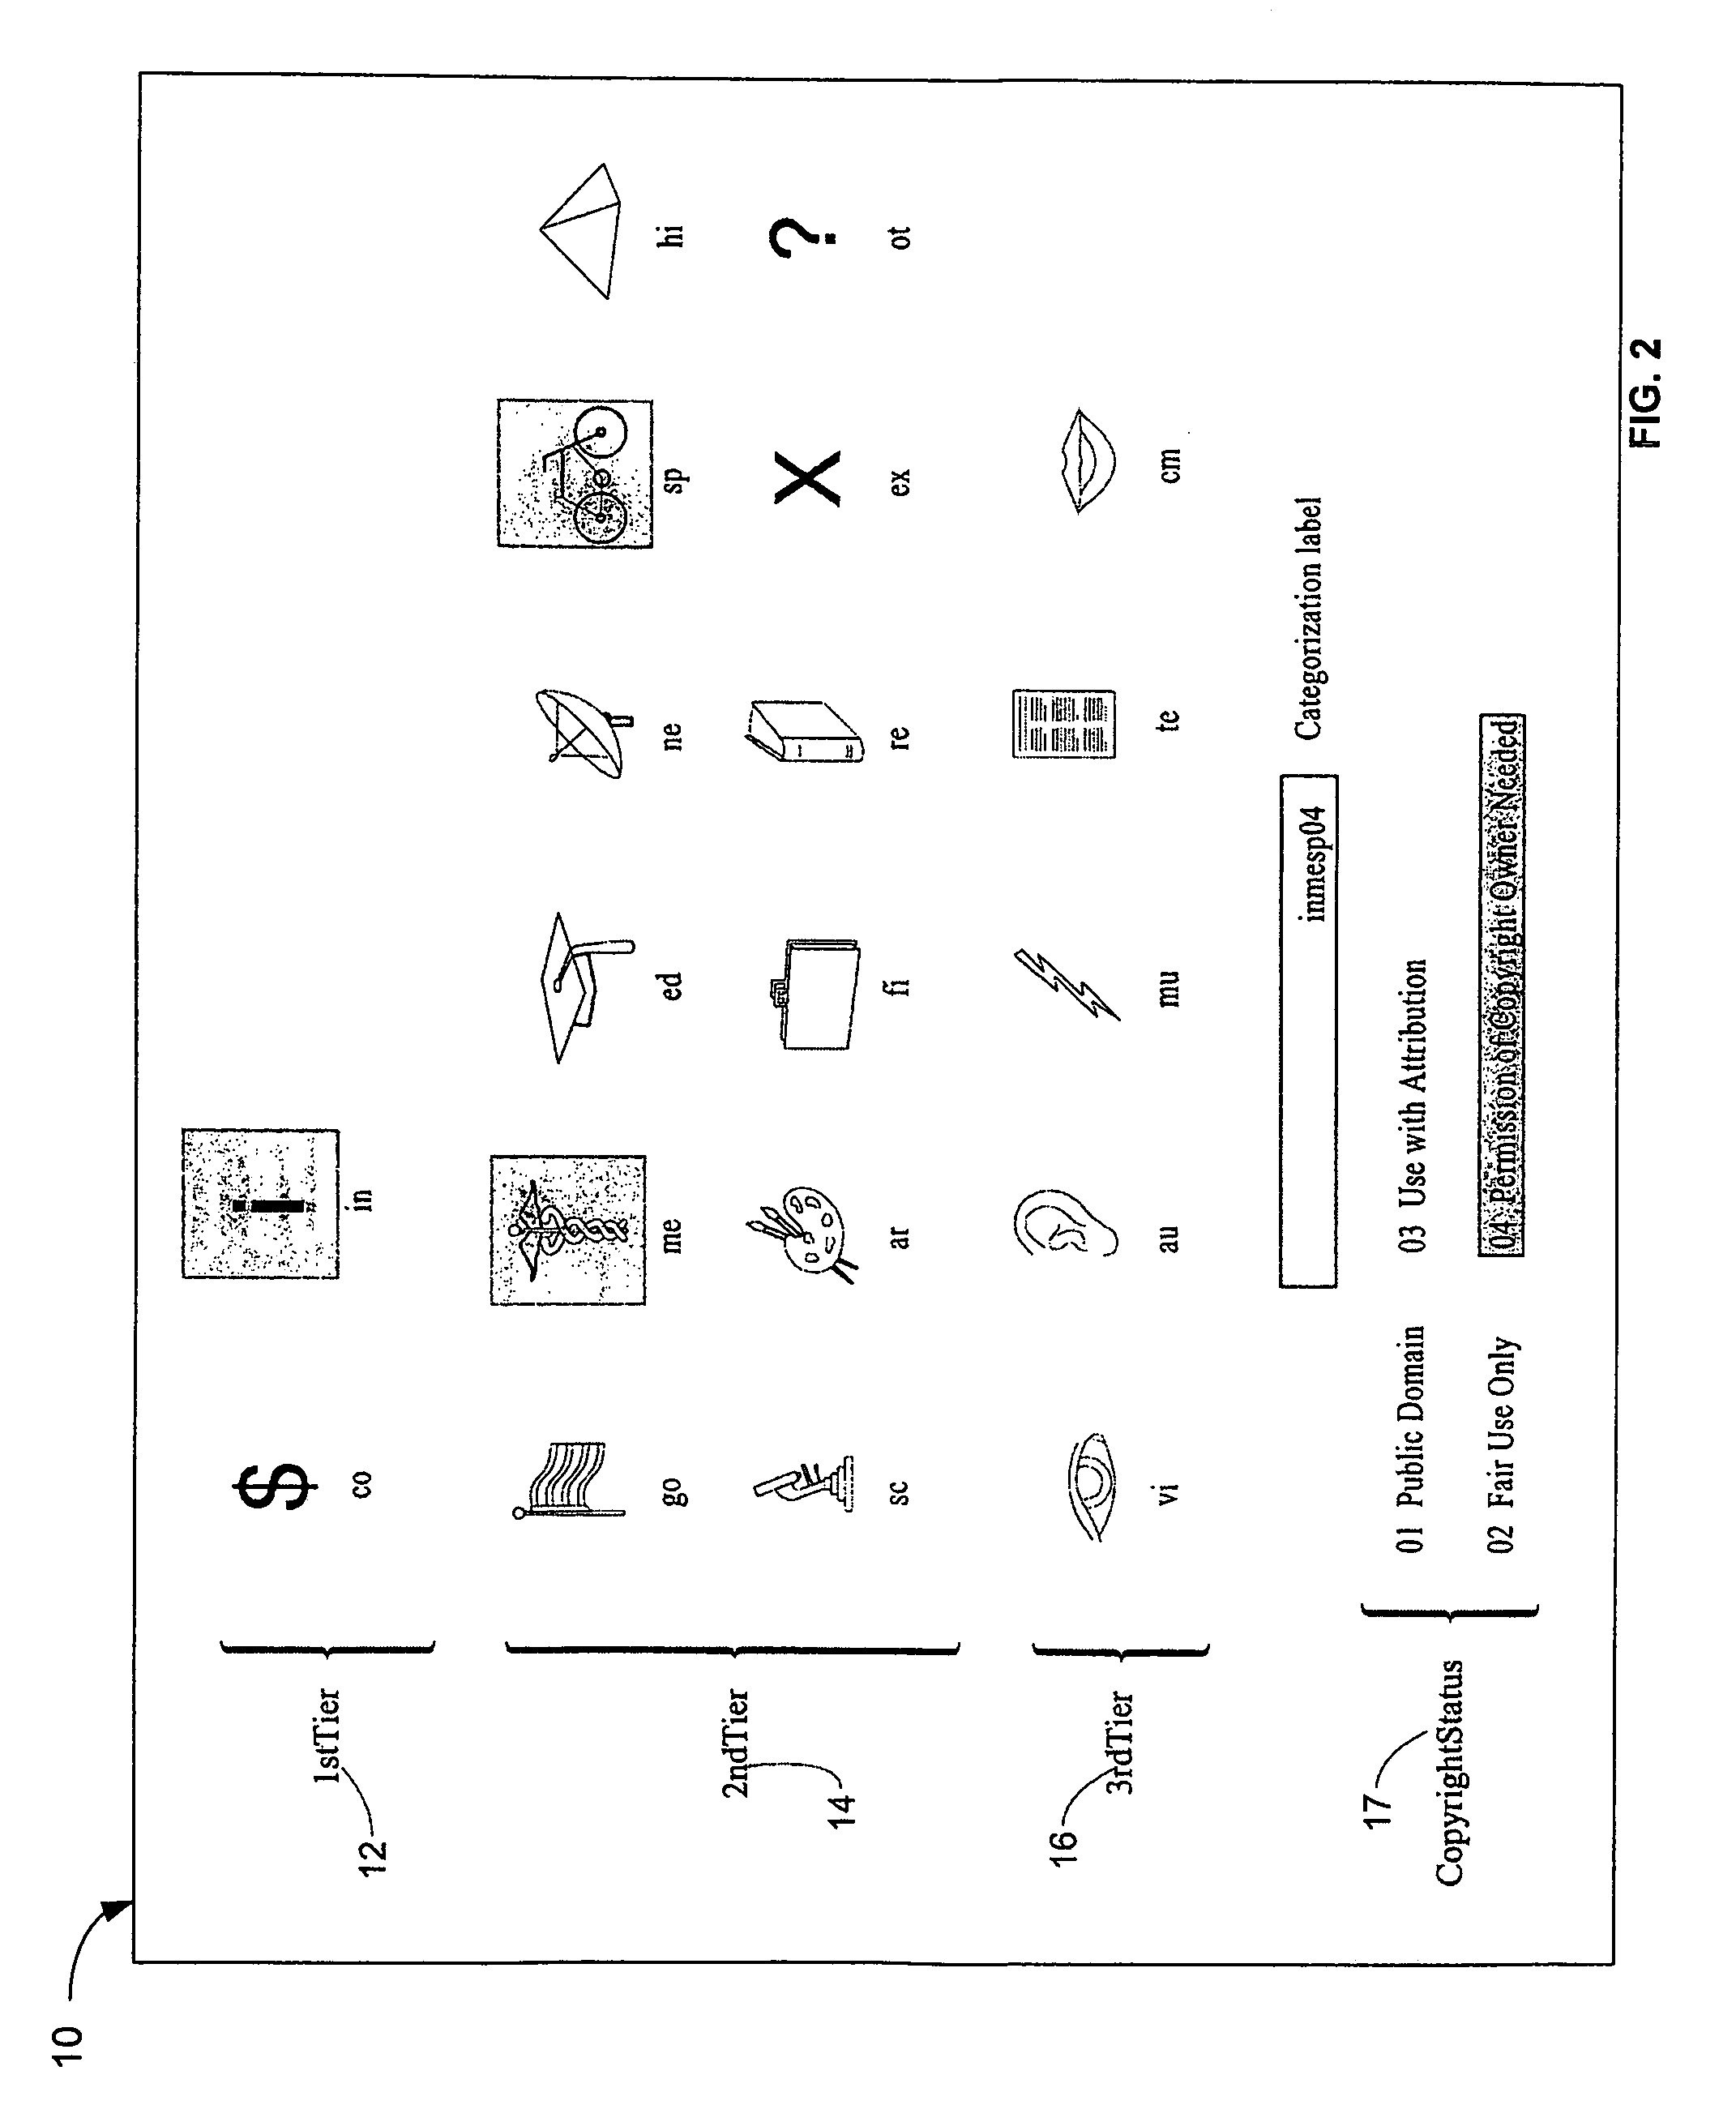 Method of coding, categorizing, and retrieving network pages and sites